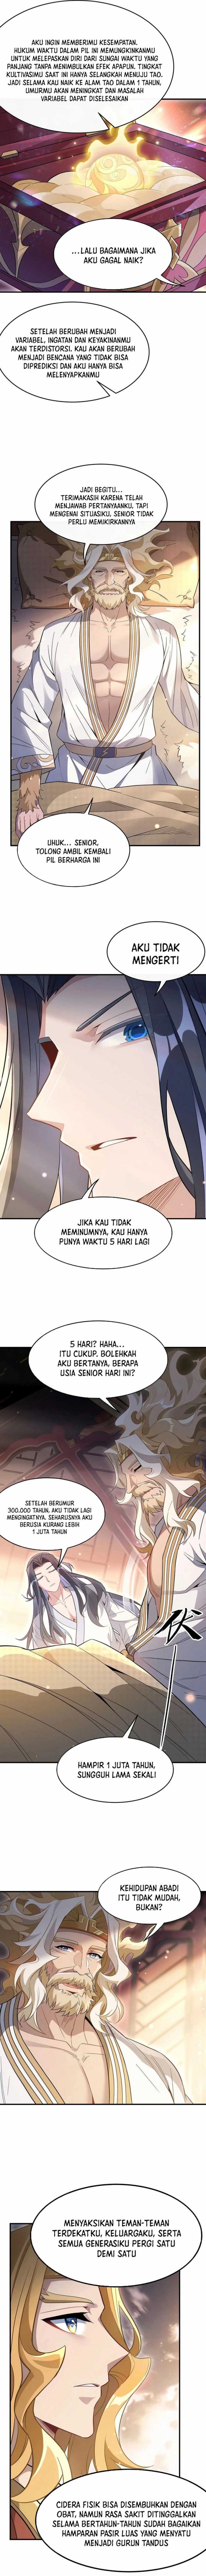 Dilarang COPAS - situs resmi www.mangacanblog.com - Komik my female apprentices are all big shots from the future 237 - chapter 237 238 Indonesia my female apprentices are all big shots from the future 237 - chapter 237 Terbaru 5|Baca Manga Komik Indonesia|Mangacan